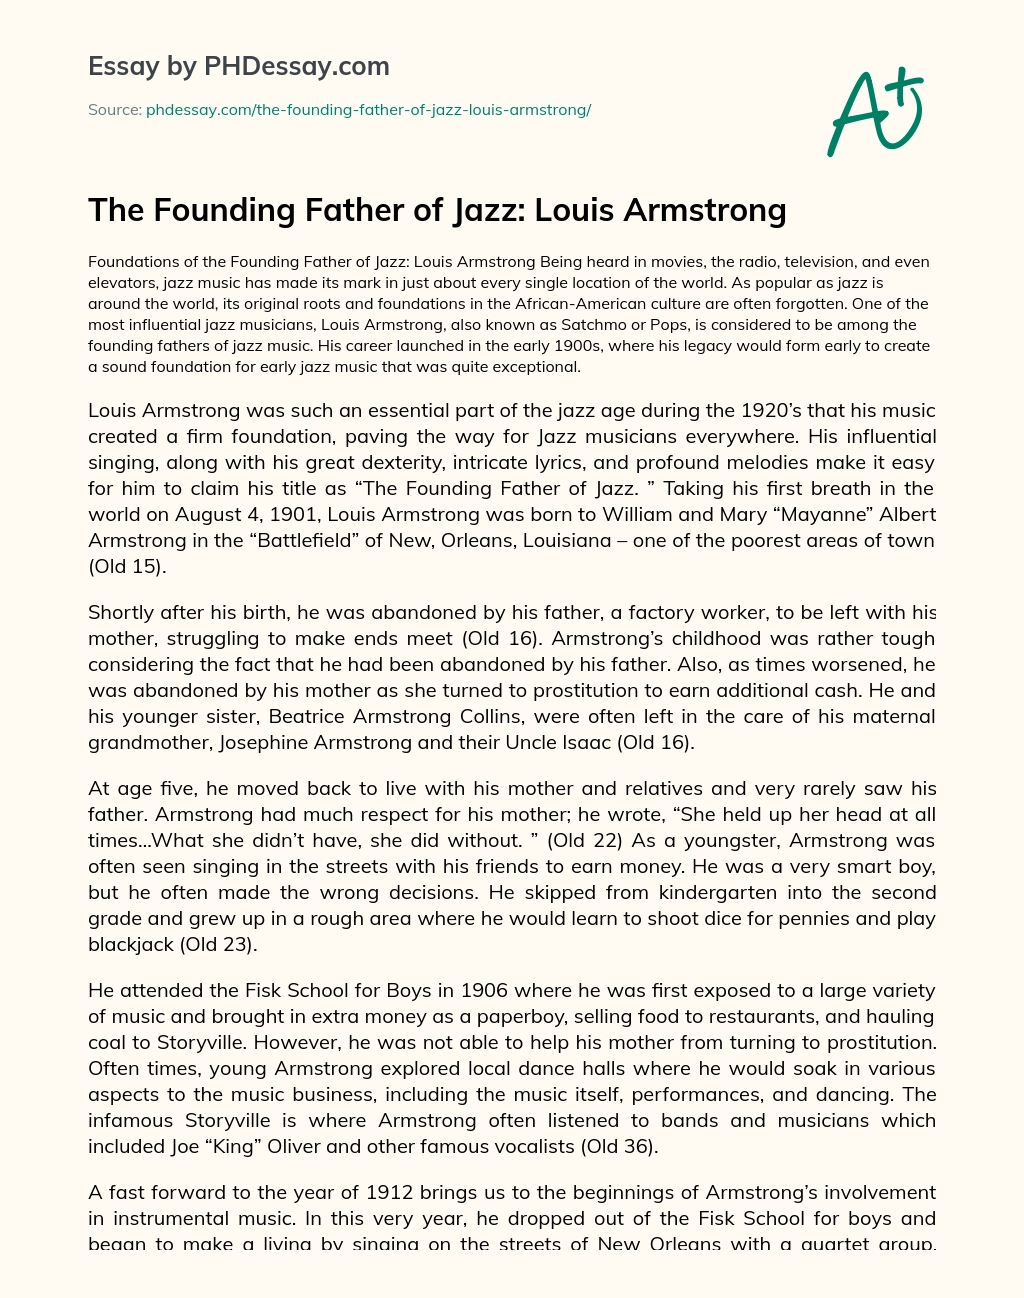 The Founding Father of Jazz: Louis Armstrong essay